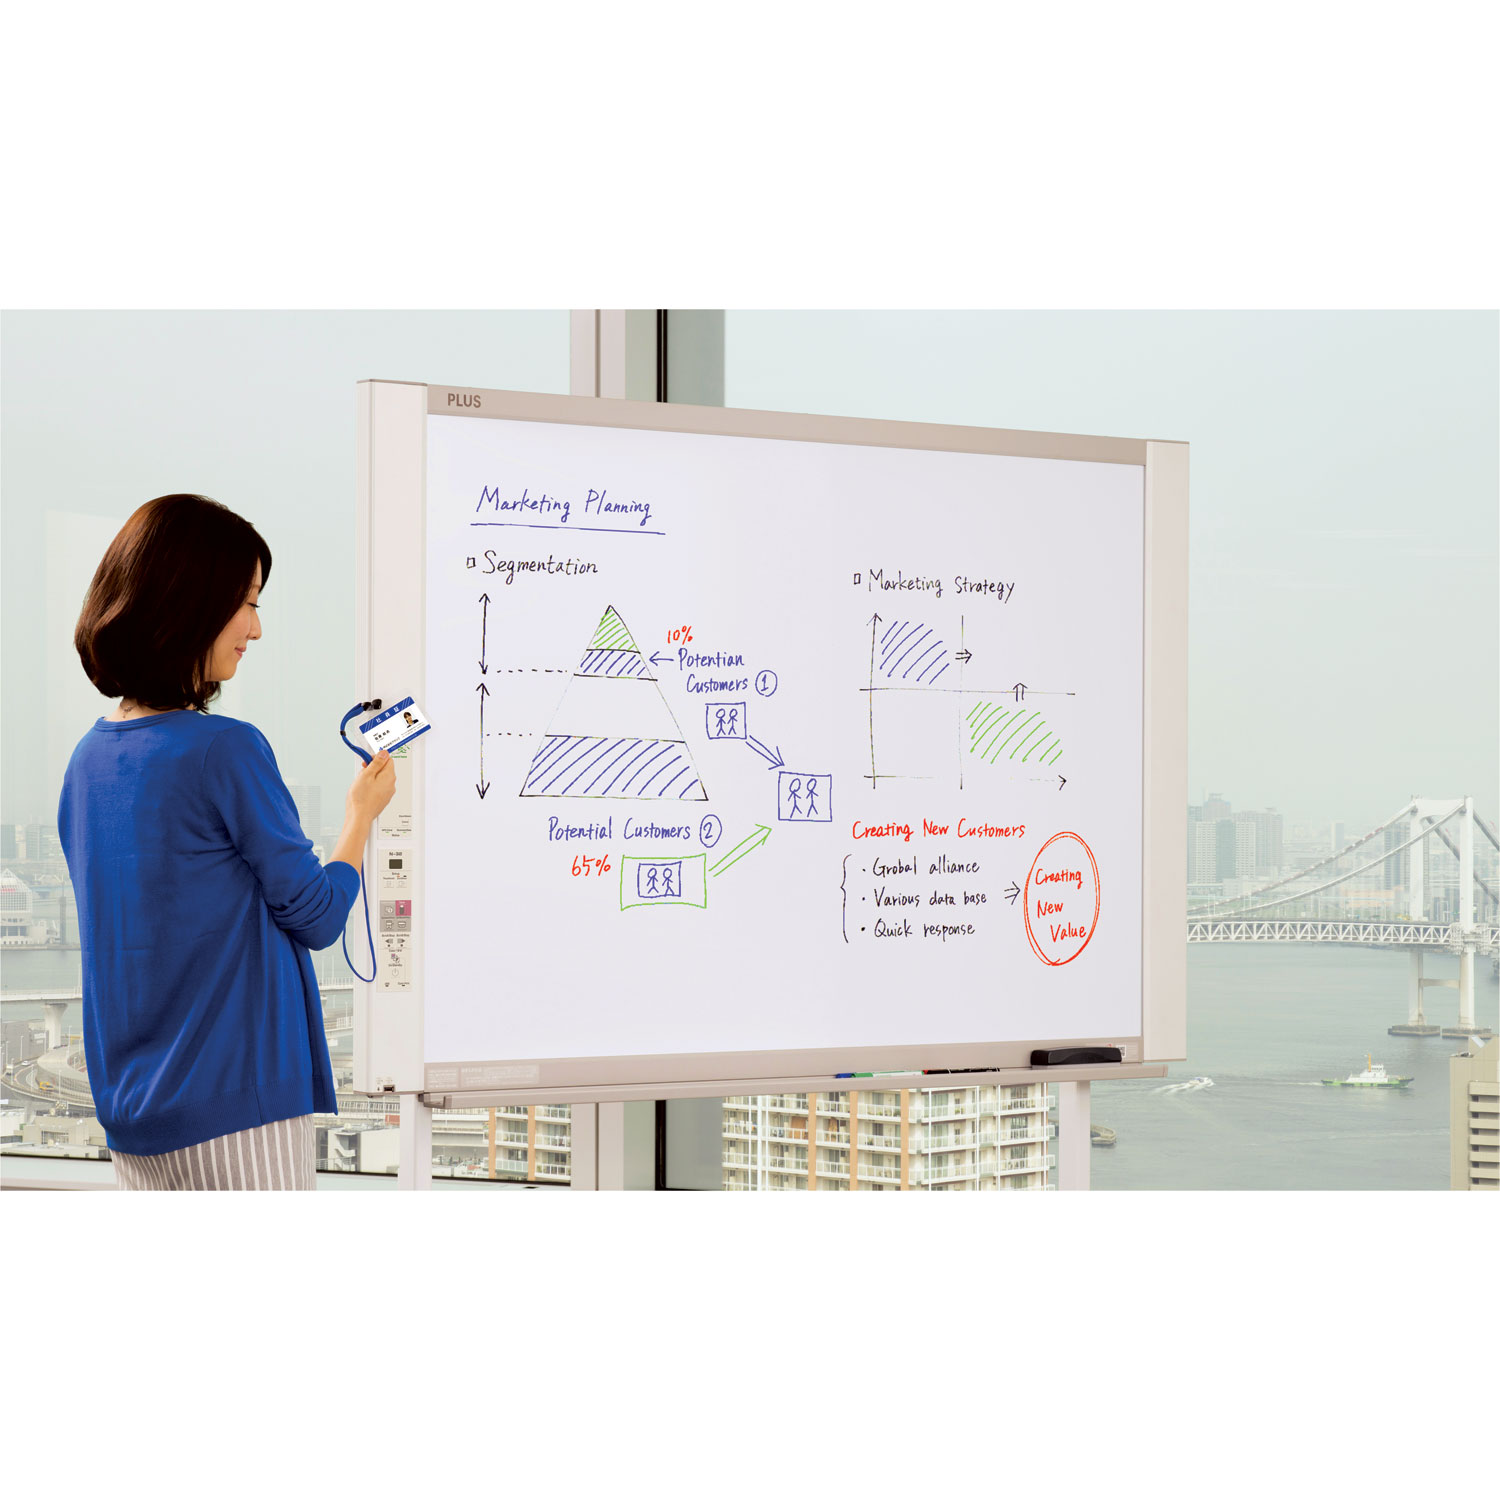  PLUS 428-292 Email-Capable Copyboard, 58.3 x 39.4, White (PLSN324) 